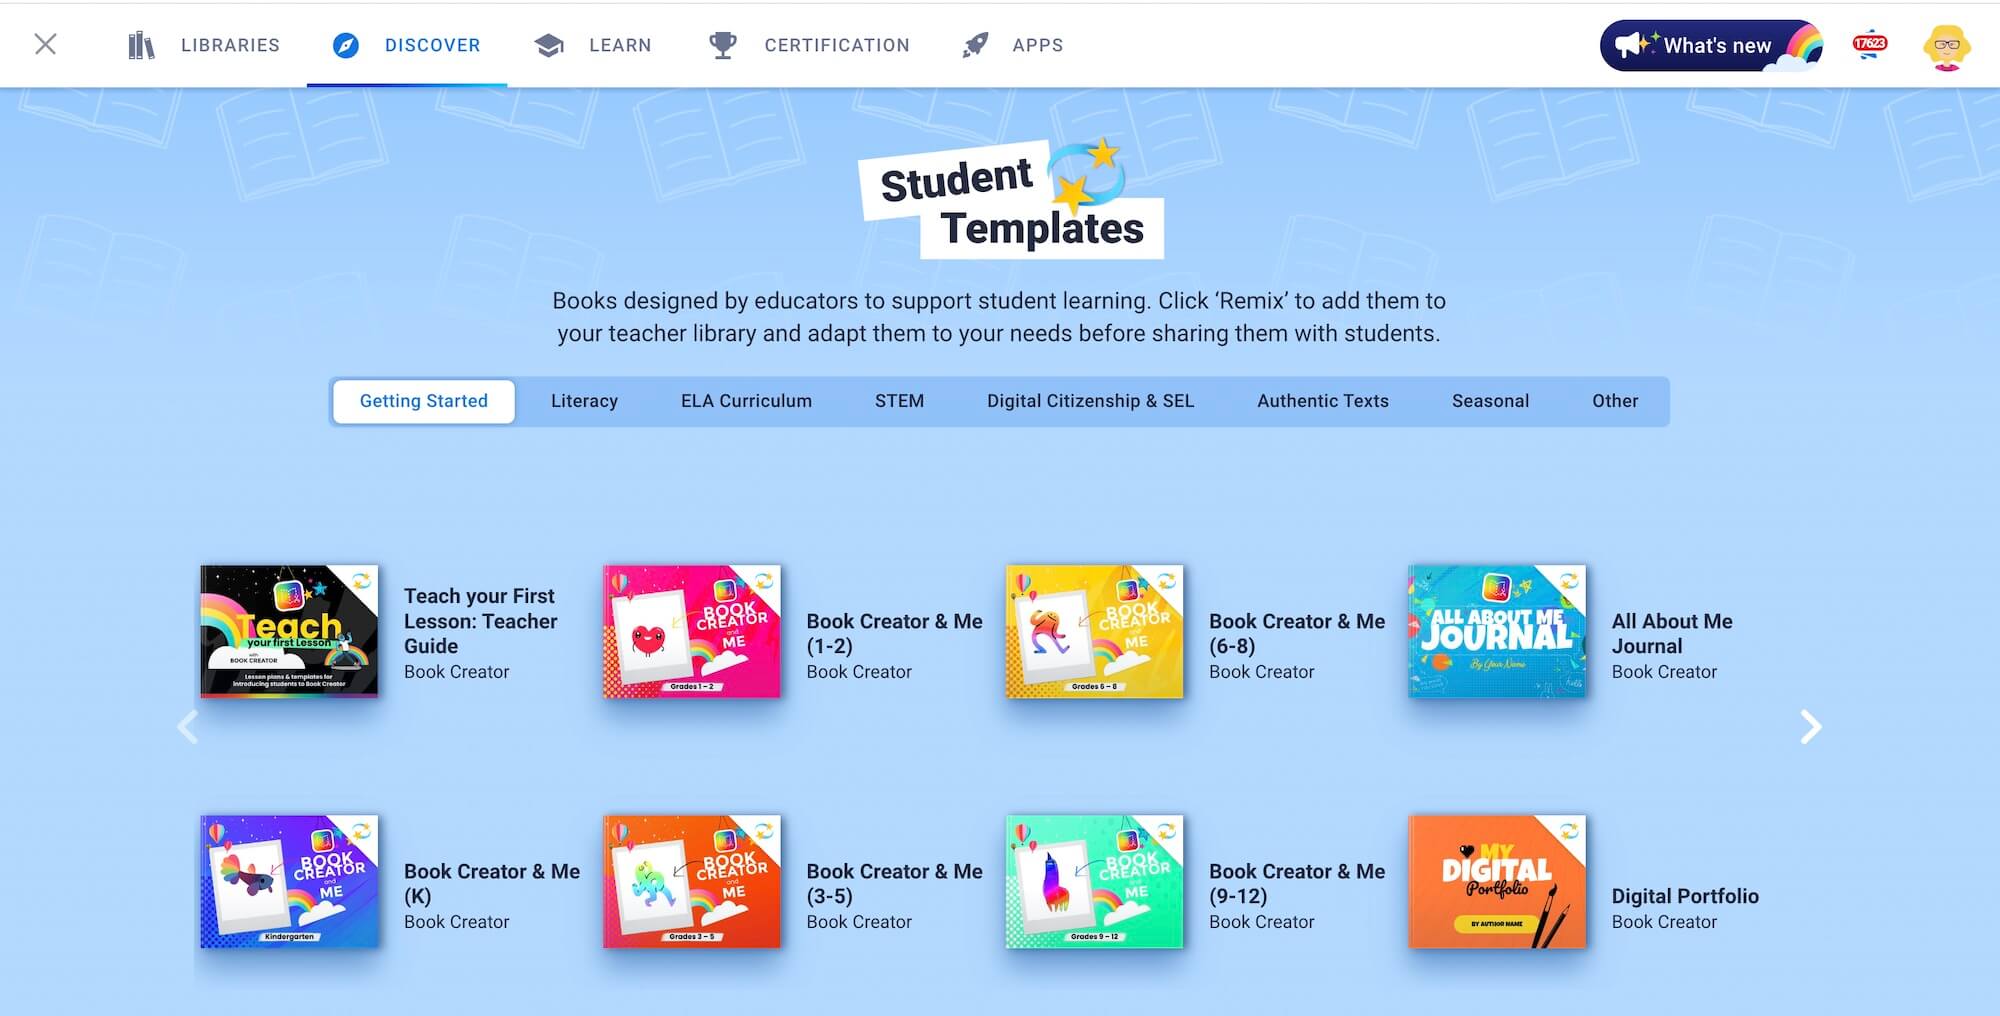 Student templates in Discover